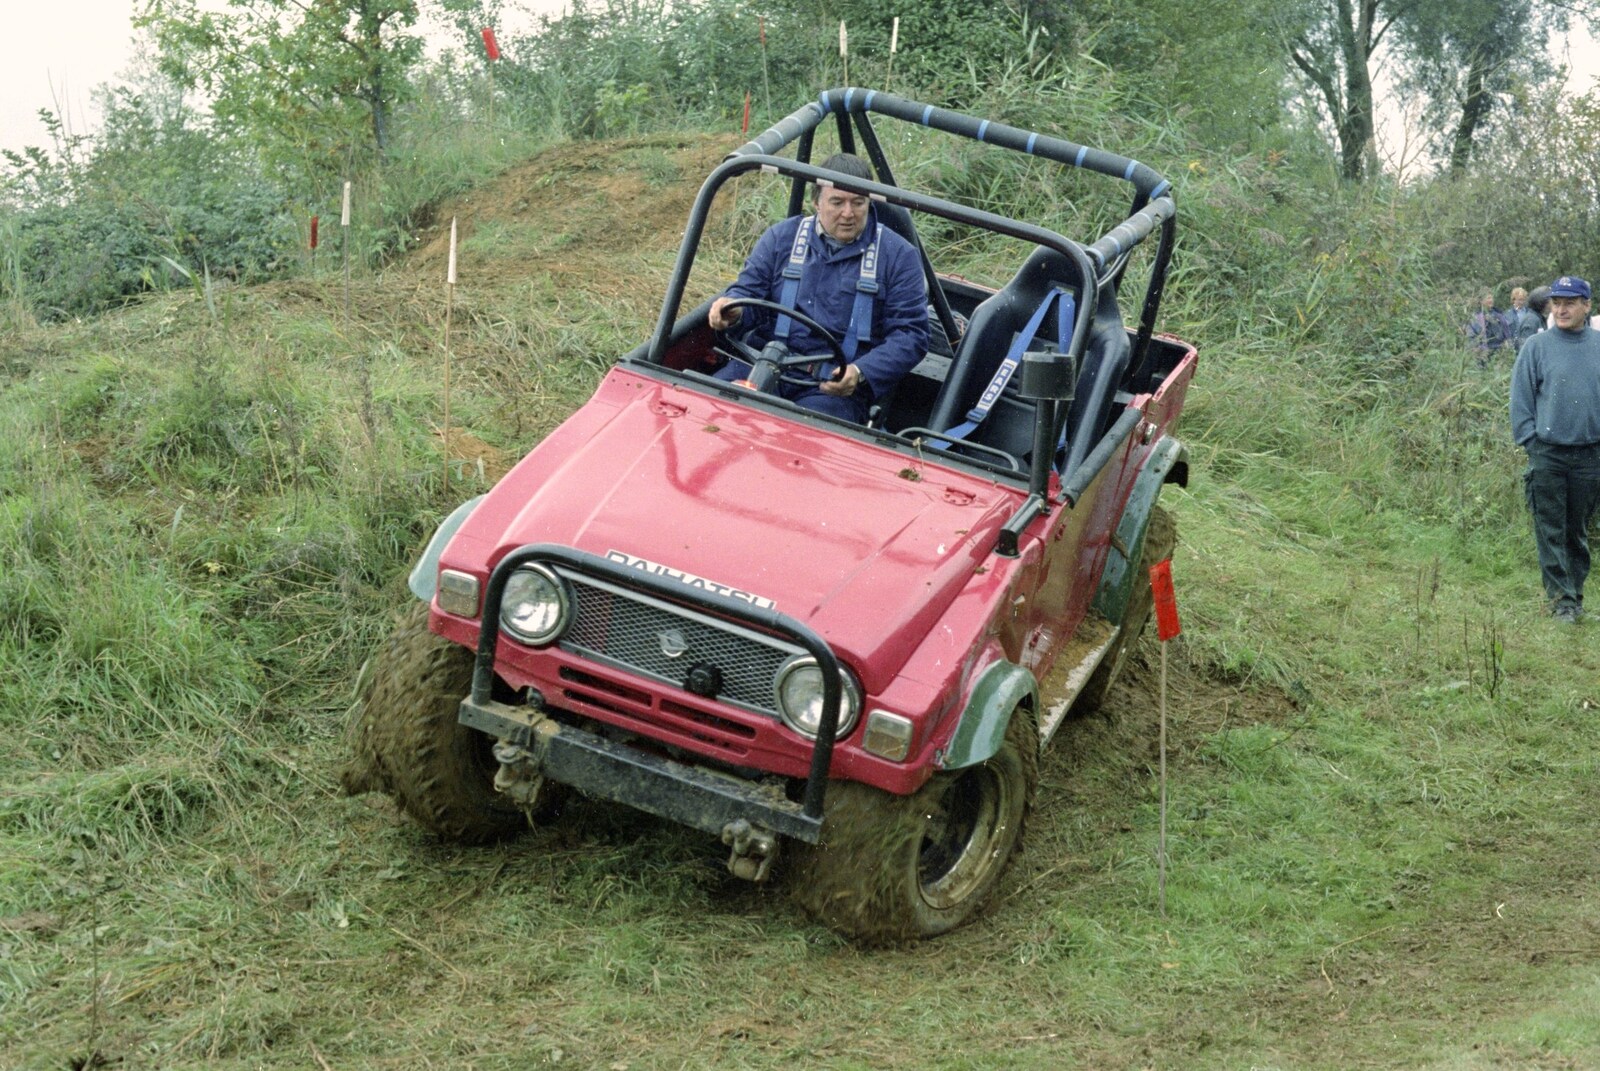 Corky on a hill from Off-Roading With Geoff and Brenda, Suffolk - 10th October 1994